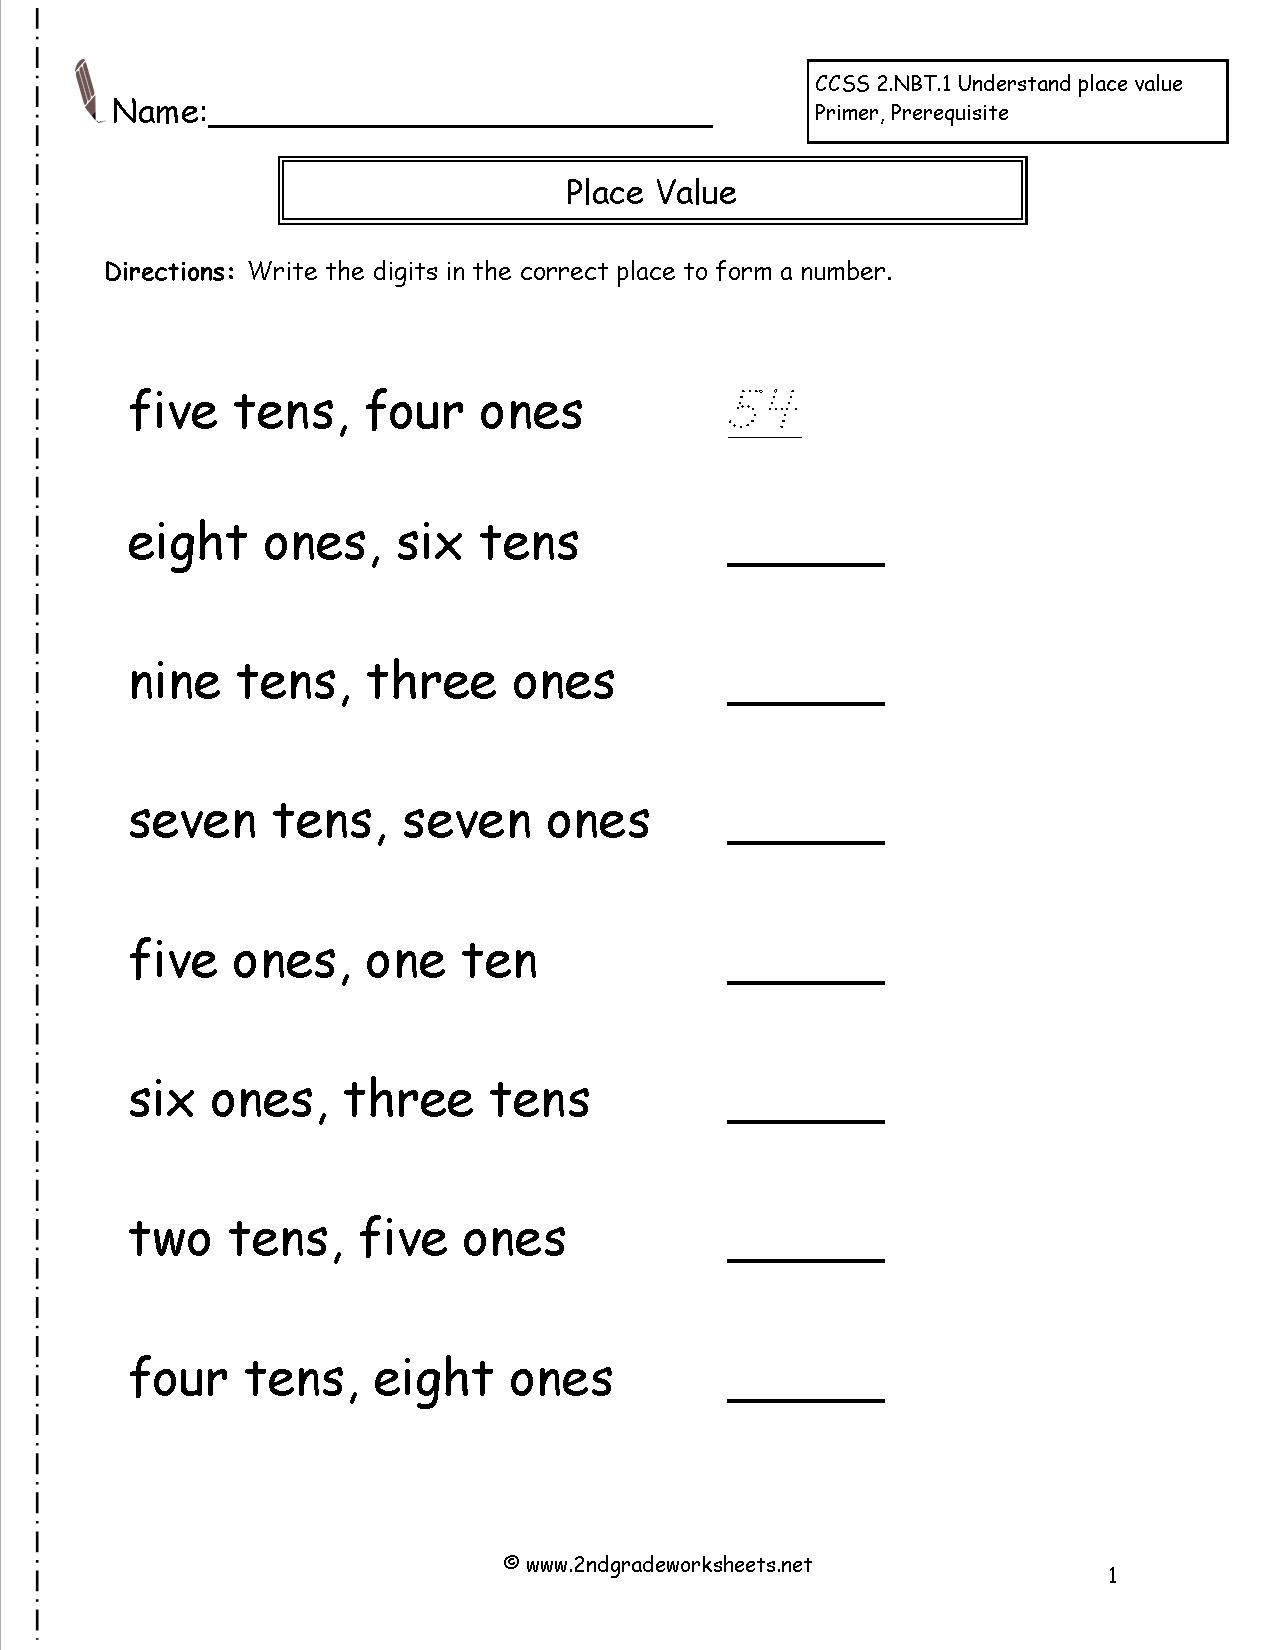 2nd grade place value worksheets tens and ones Tens ones grouping